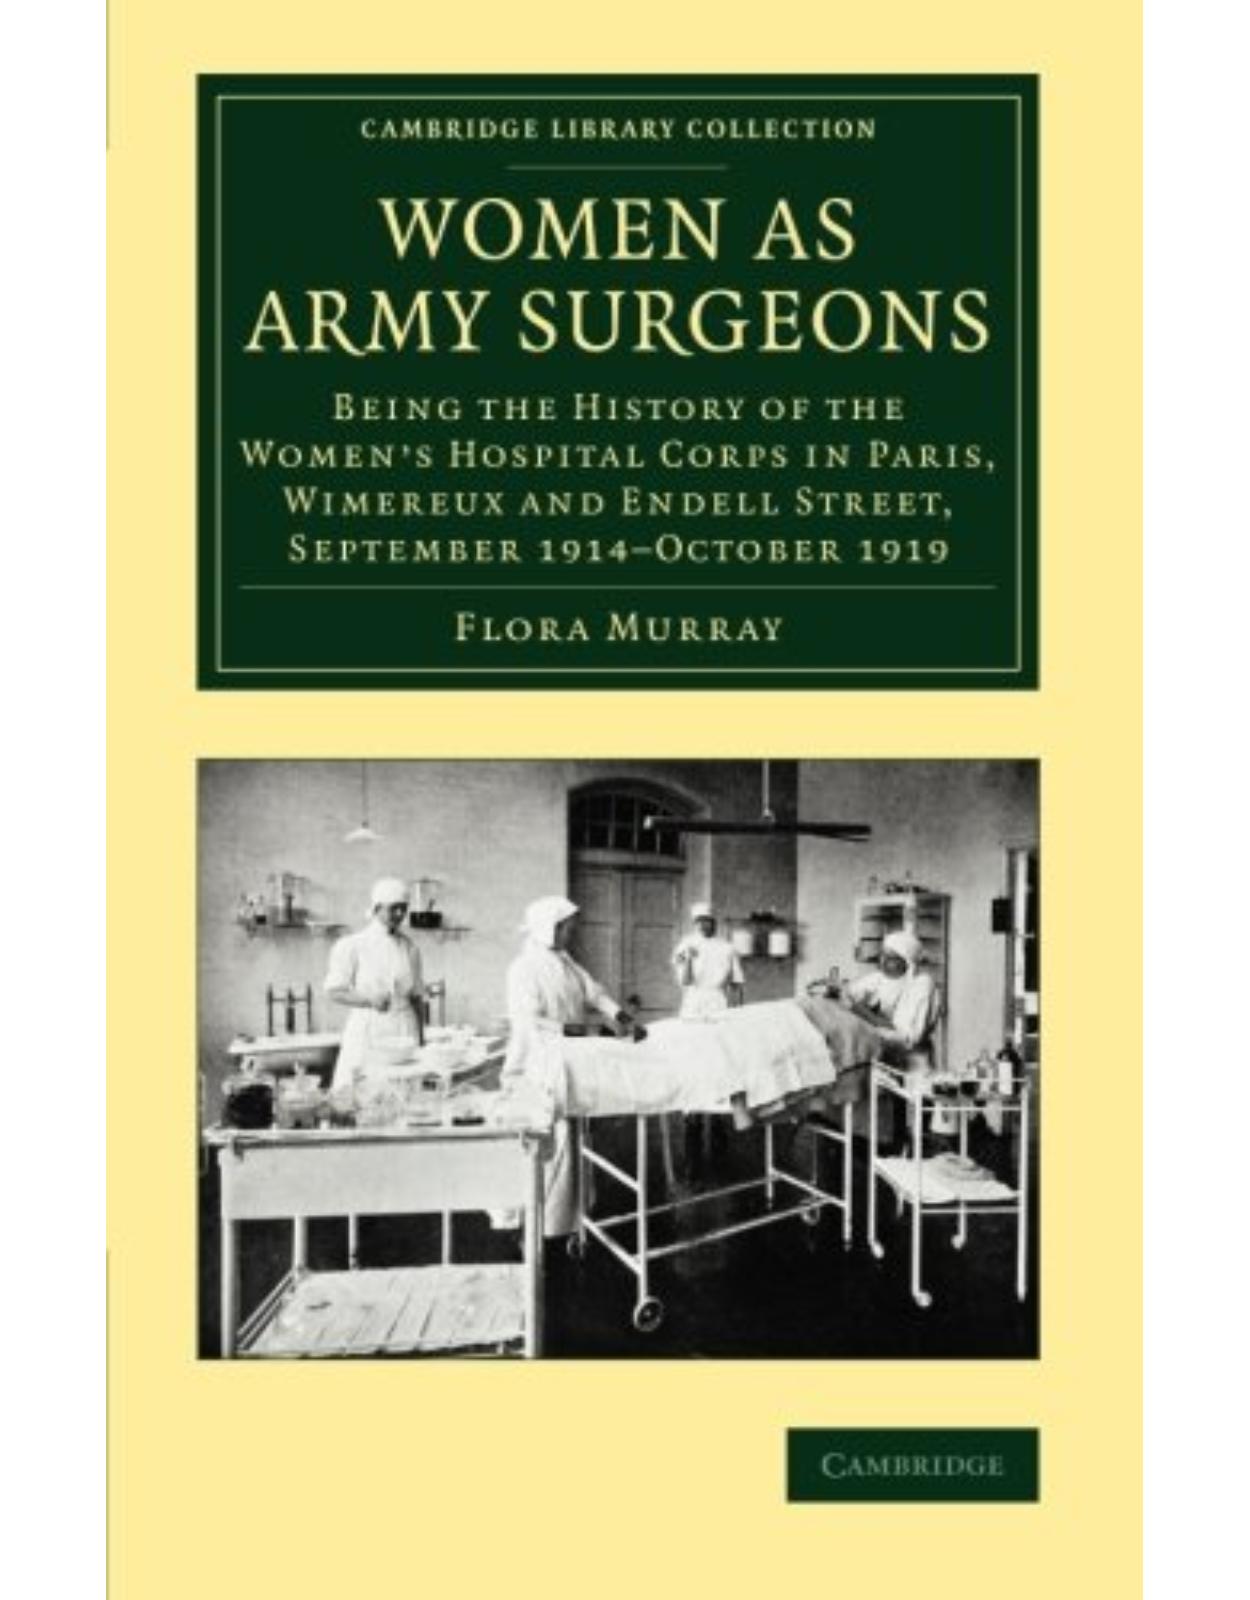 Women as Army Surgeons: Being the History of the Women's Hospital Corps in Paris, Wimereux and Endell Street, September 1914-October 1919 (Cambridge Library Collection - History of Medicine)